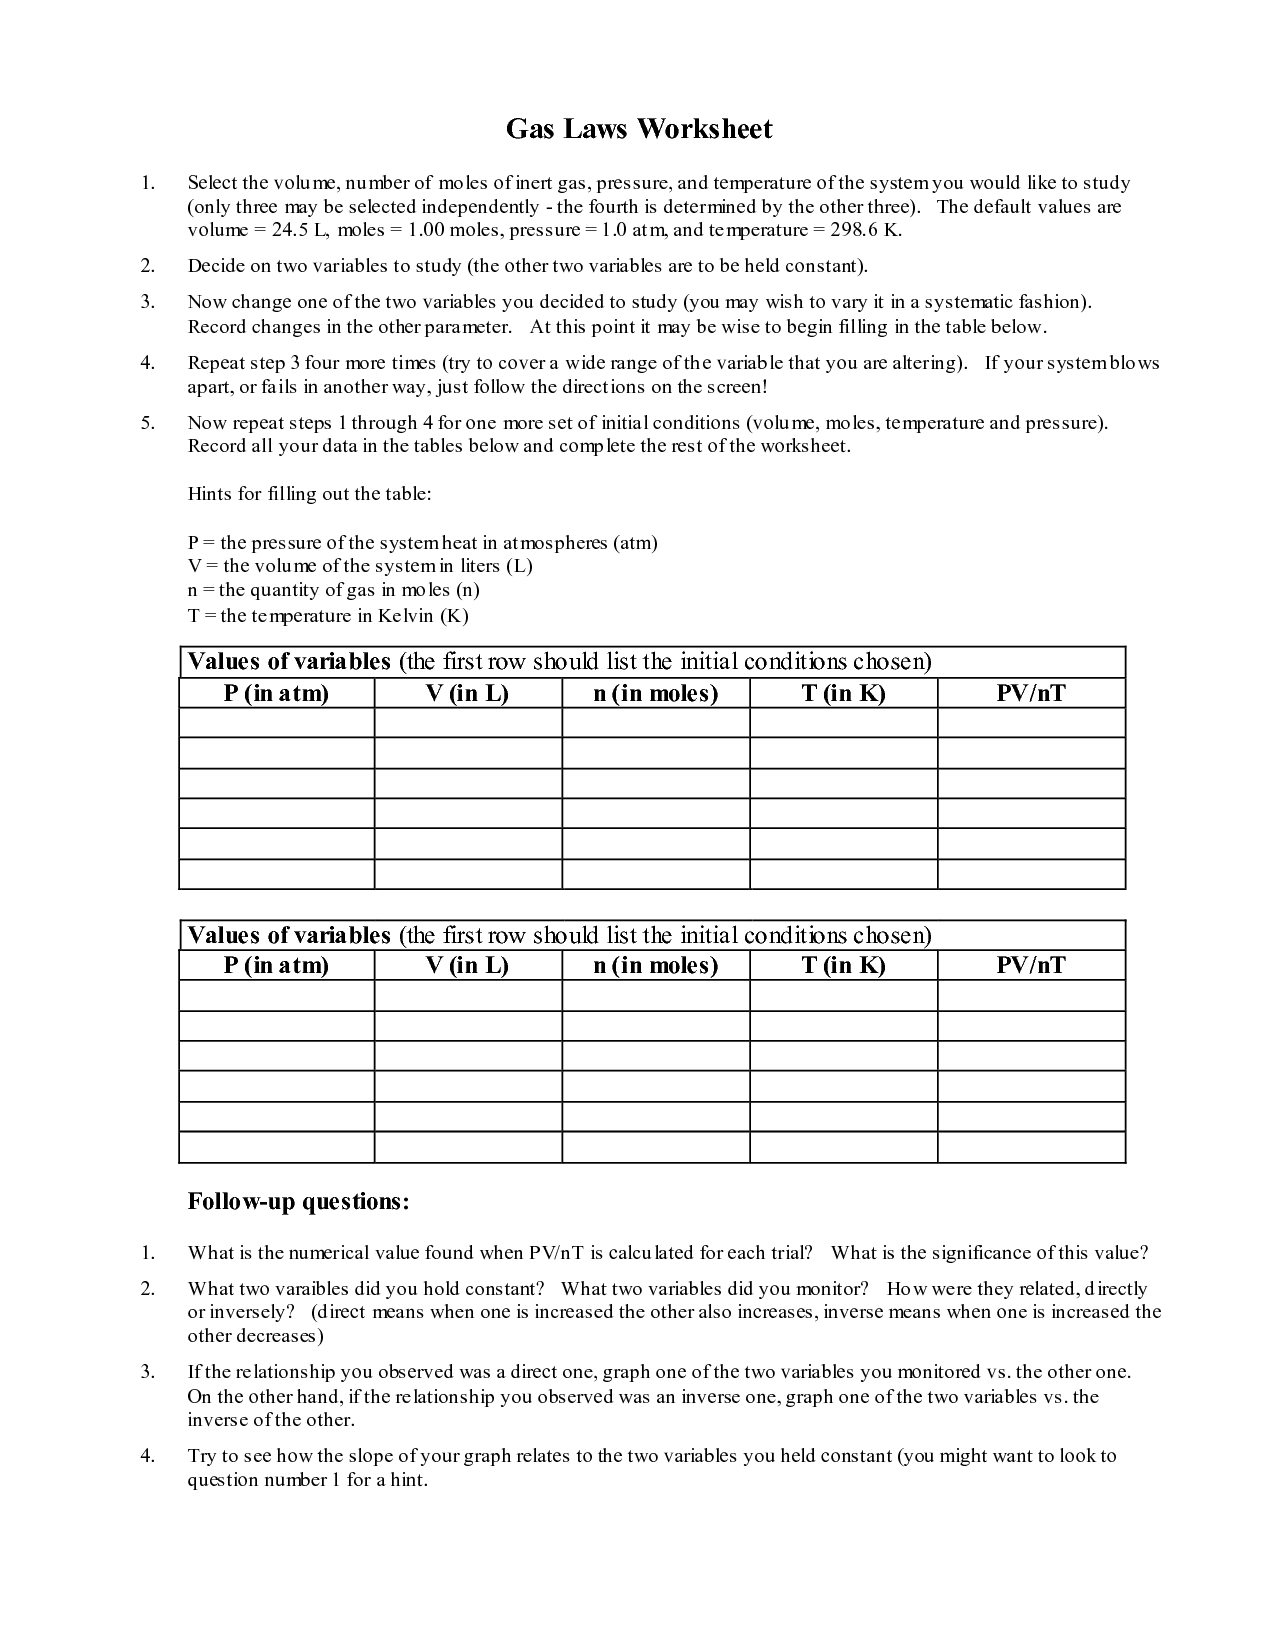 16-best-images-of-gas-law-calculations-worksheets-answers-ideal-gas-law-worksheet-answer-key